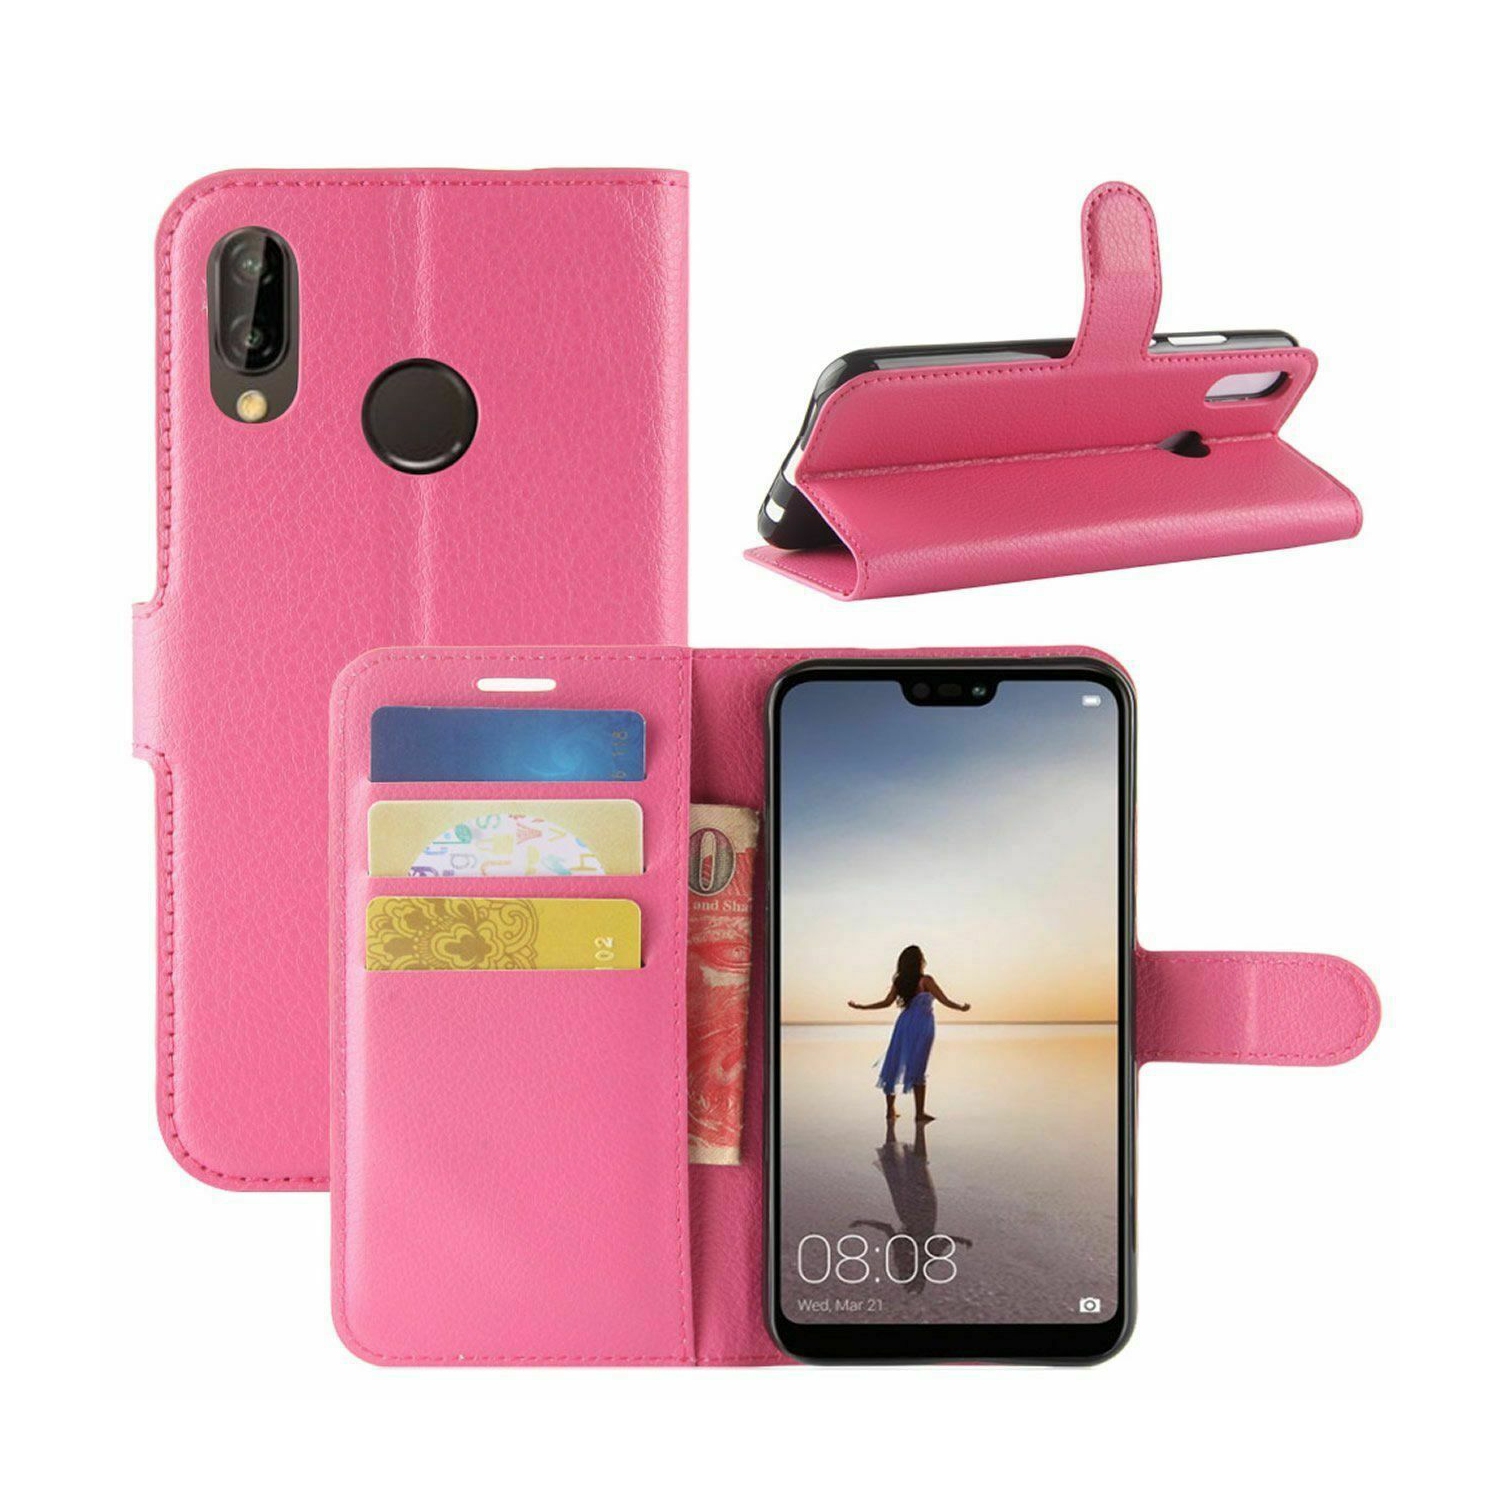 【CSmart】 Magnetic Card Slot Leather Folio Wallet Flip Case Cover for Huawei P20 Lite, Hot Pink